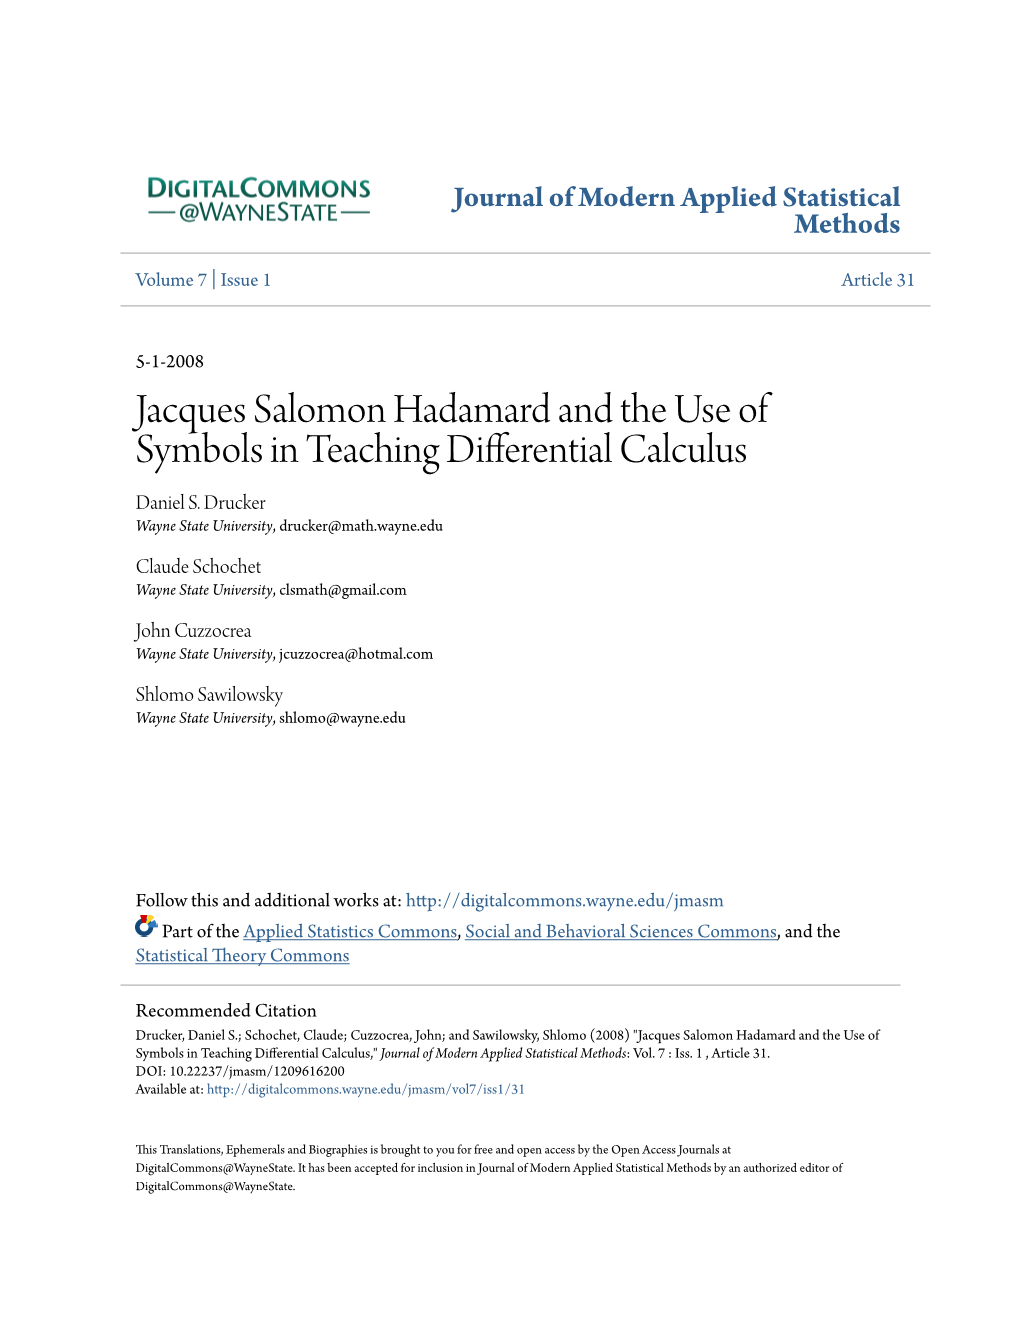 Jacques Salomon Hadamard and the Use of Symbols in Teaching Differential Calculus Daniel S